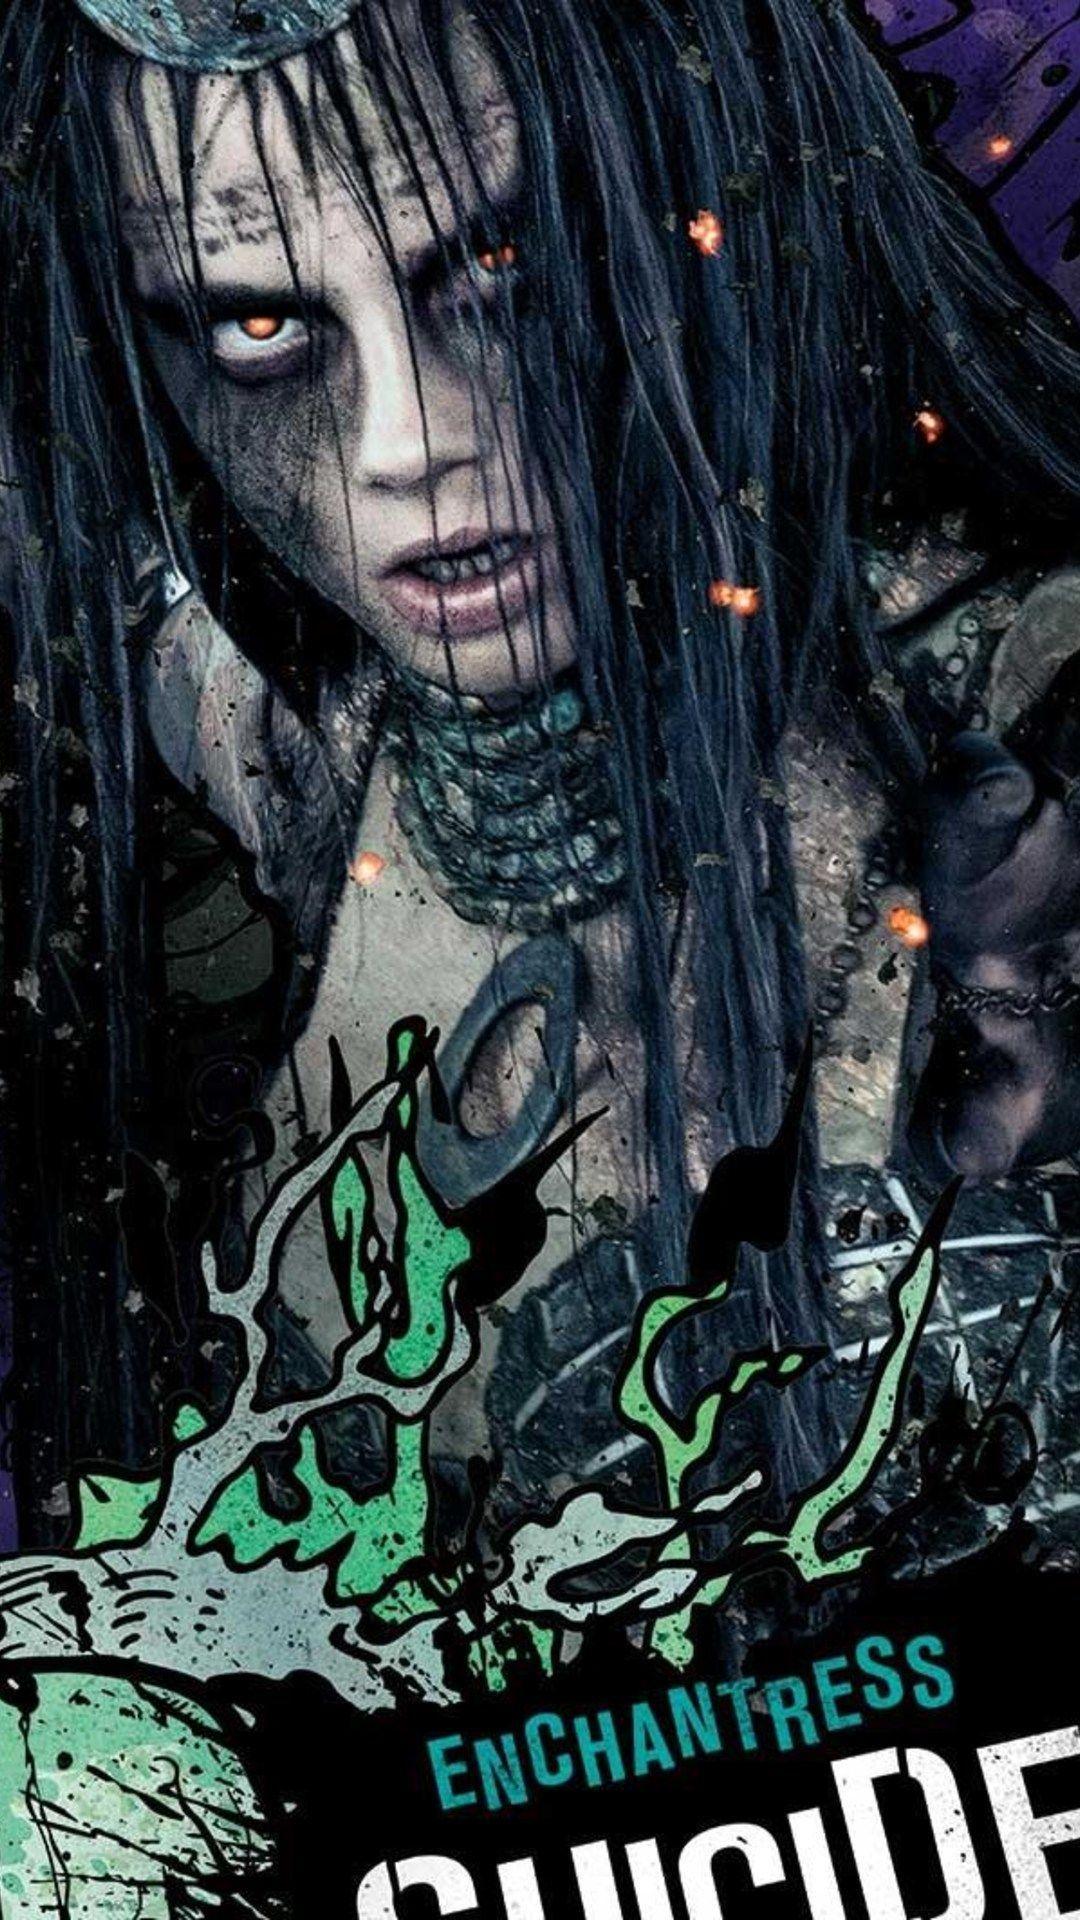 Download Enchantress In Suicide Squad 2K k Wallpapers In